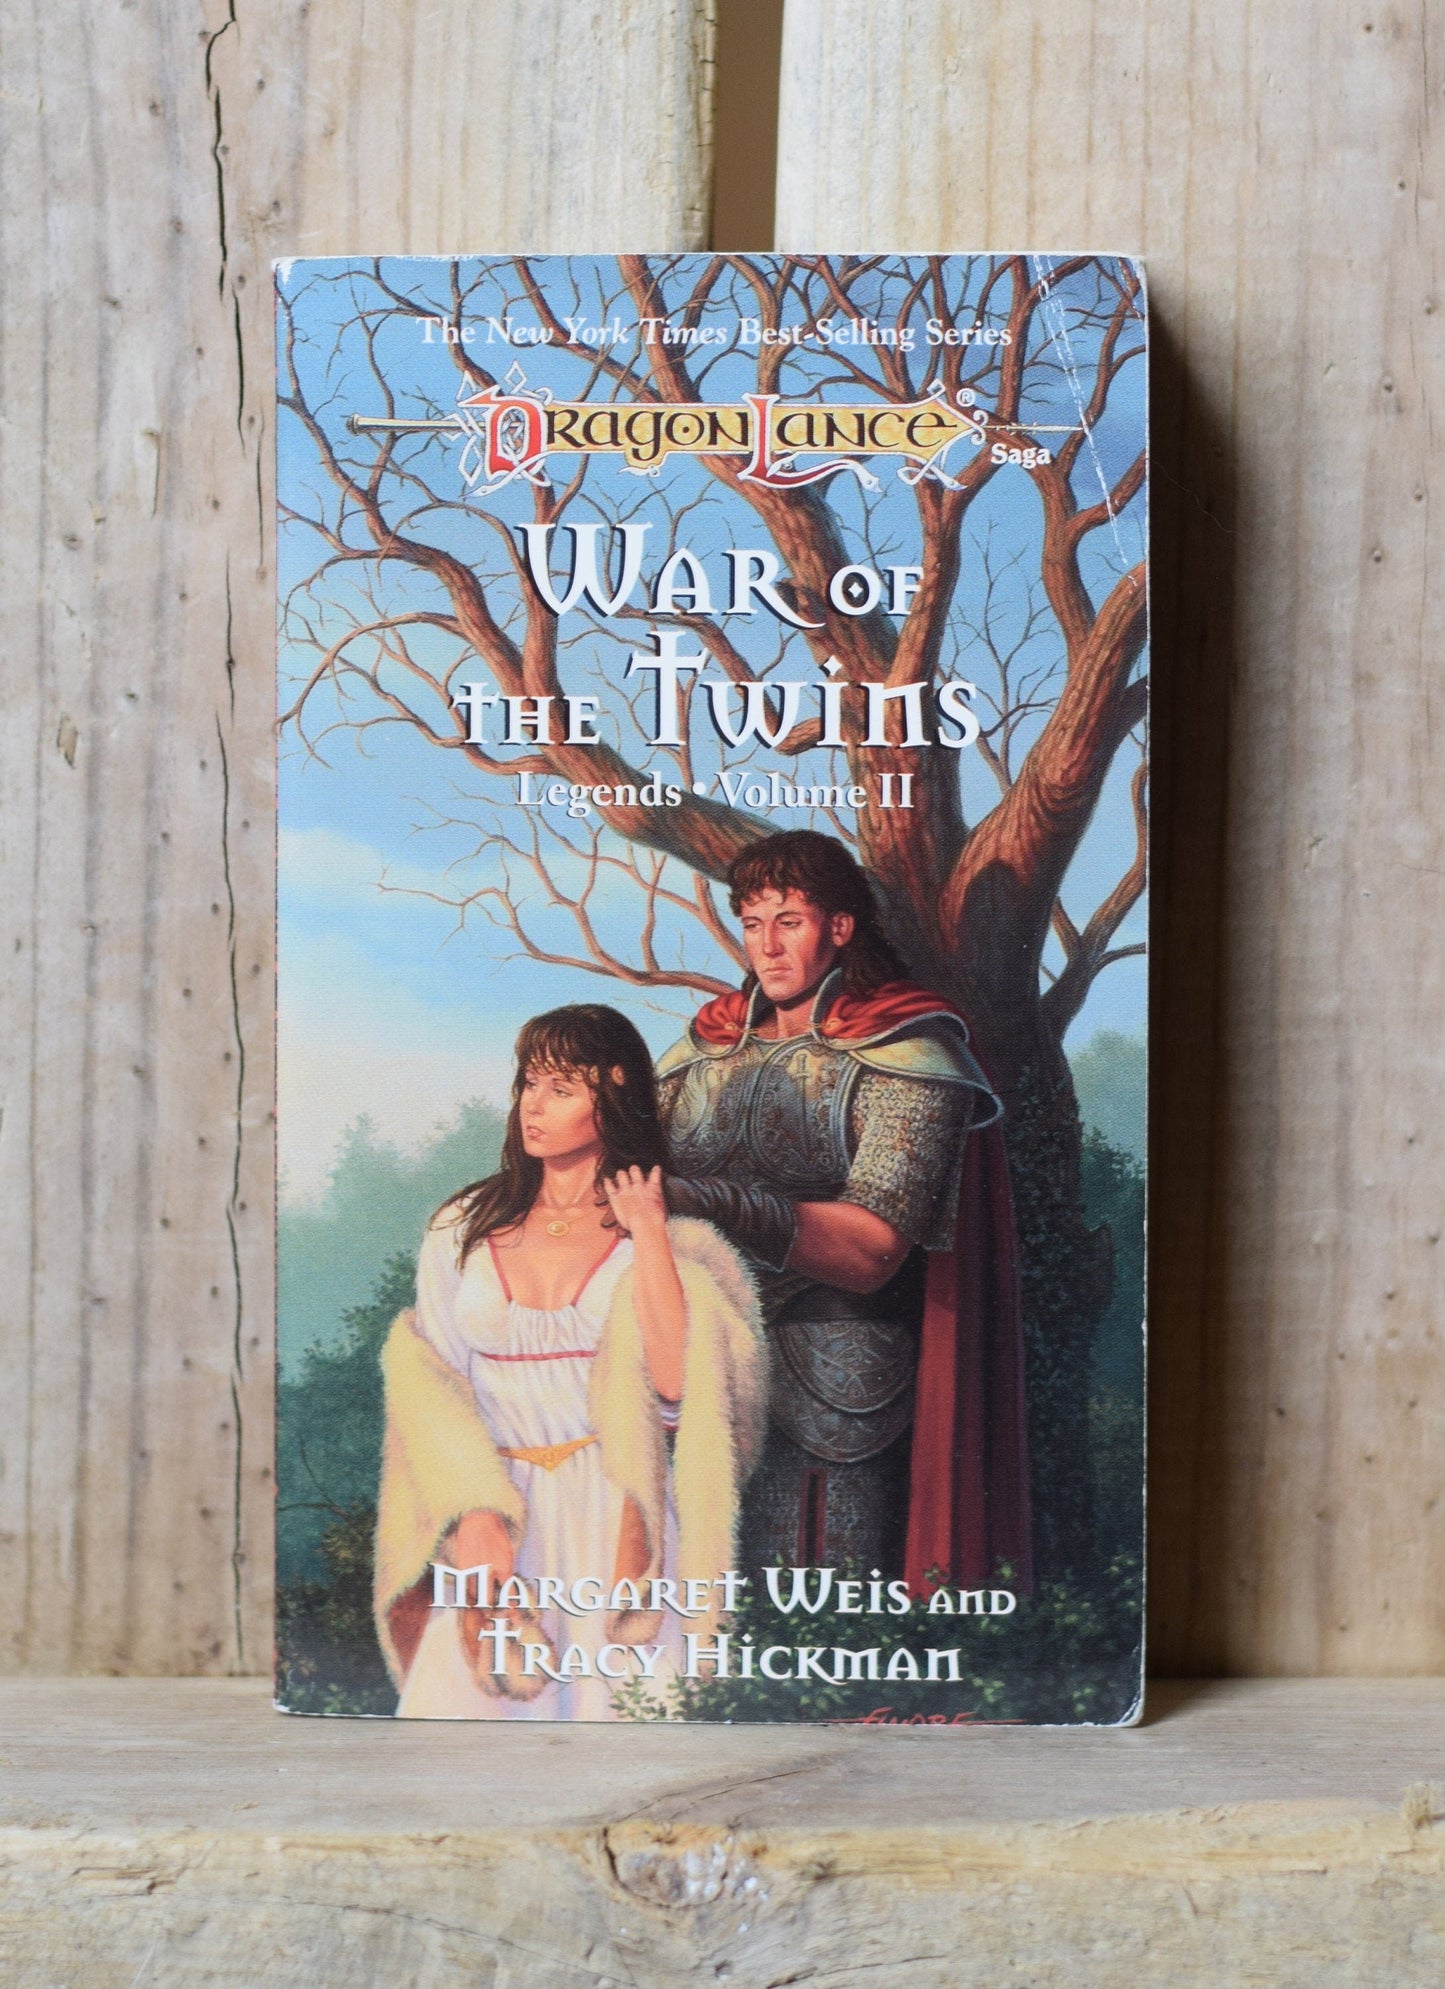 Vintage Dungeons & Dragons Paperback Novel: Margaret Weis and Tracy Hickman - War of the Twins, Legends Vol 2